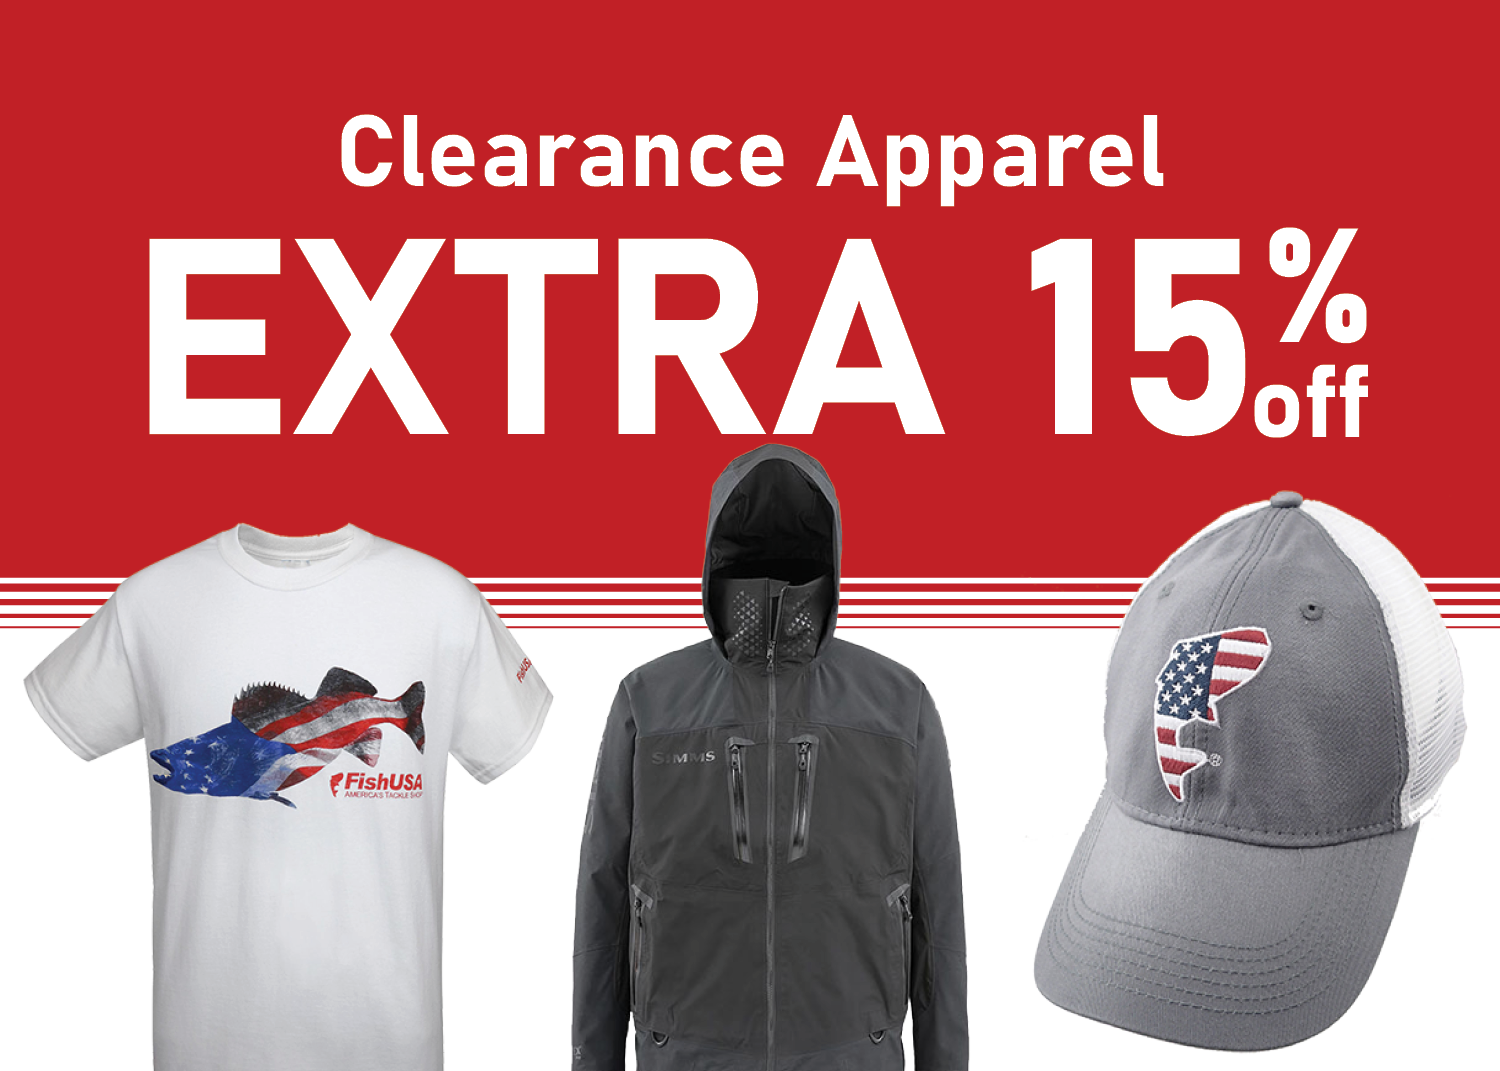 Save an EXTRA 15% on Clearance Apparel